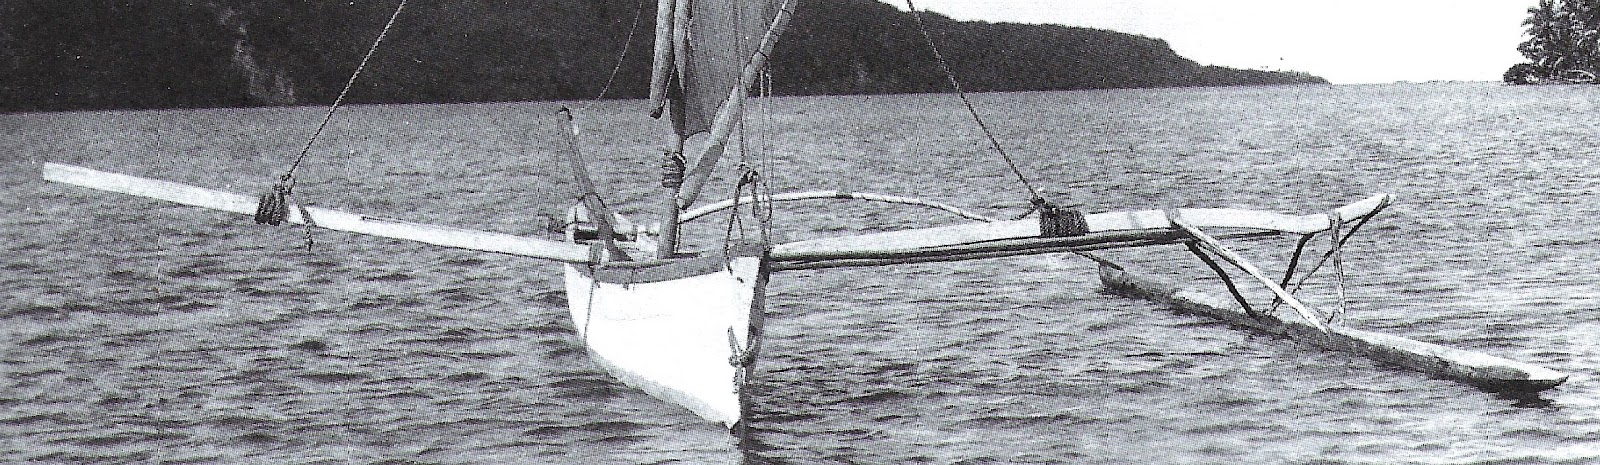             Outrigger Sailing Canoes